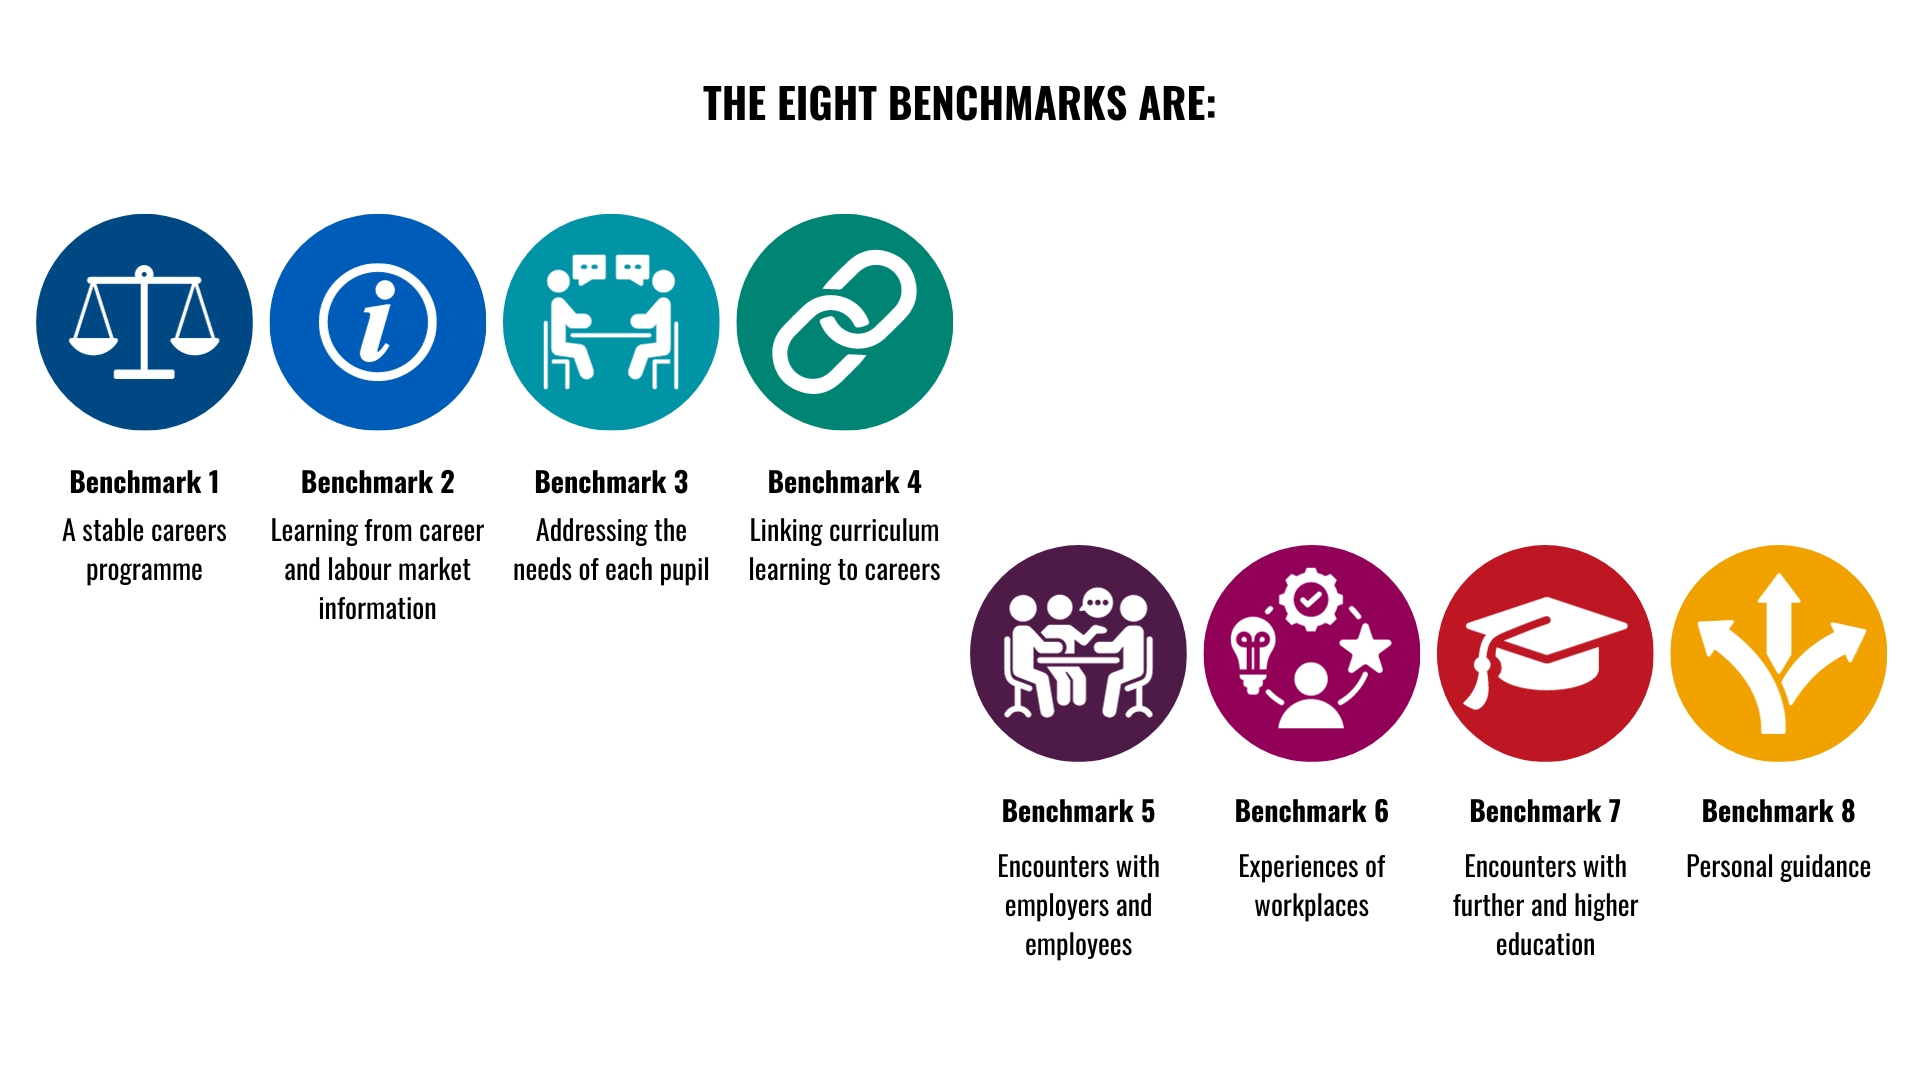 THE EIGHT BENCHMARKS ARE